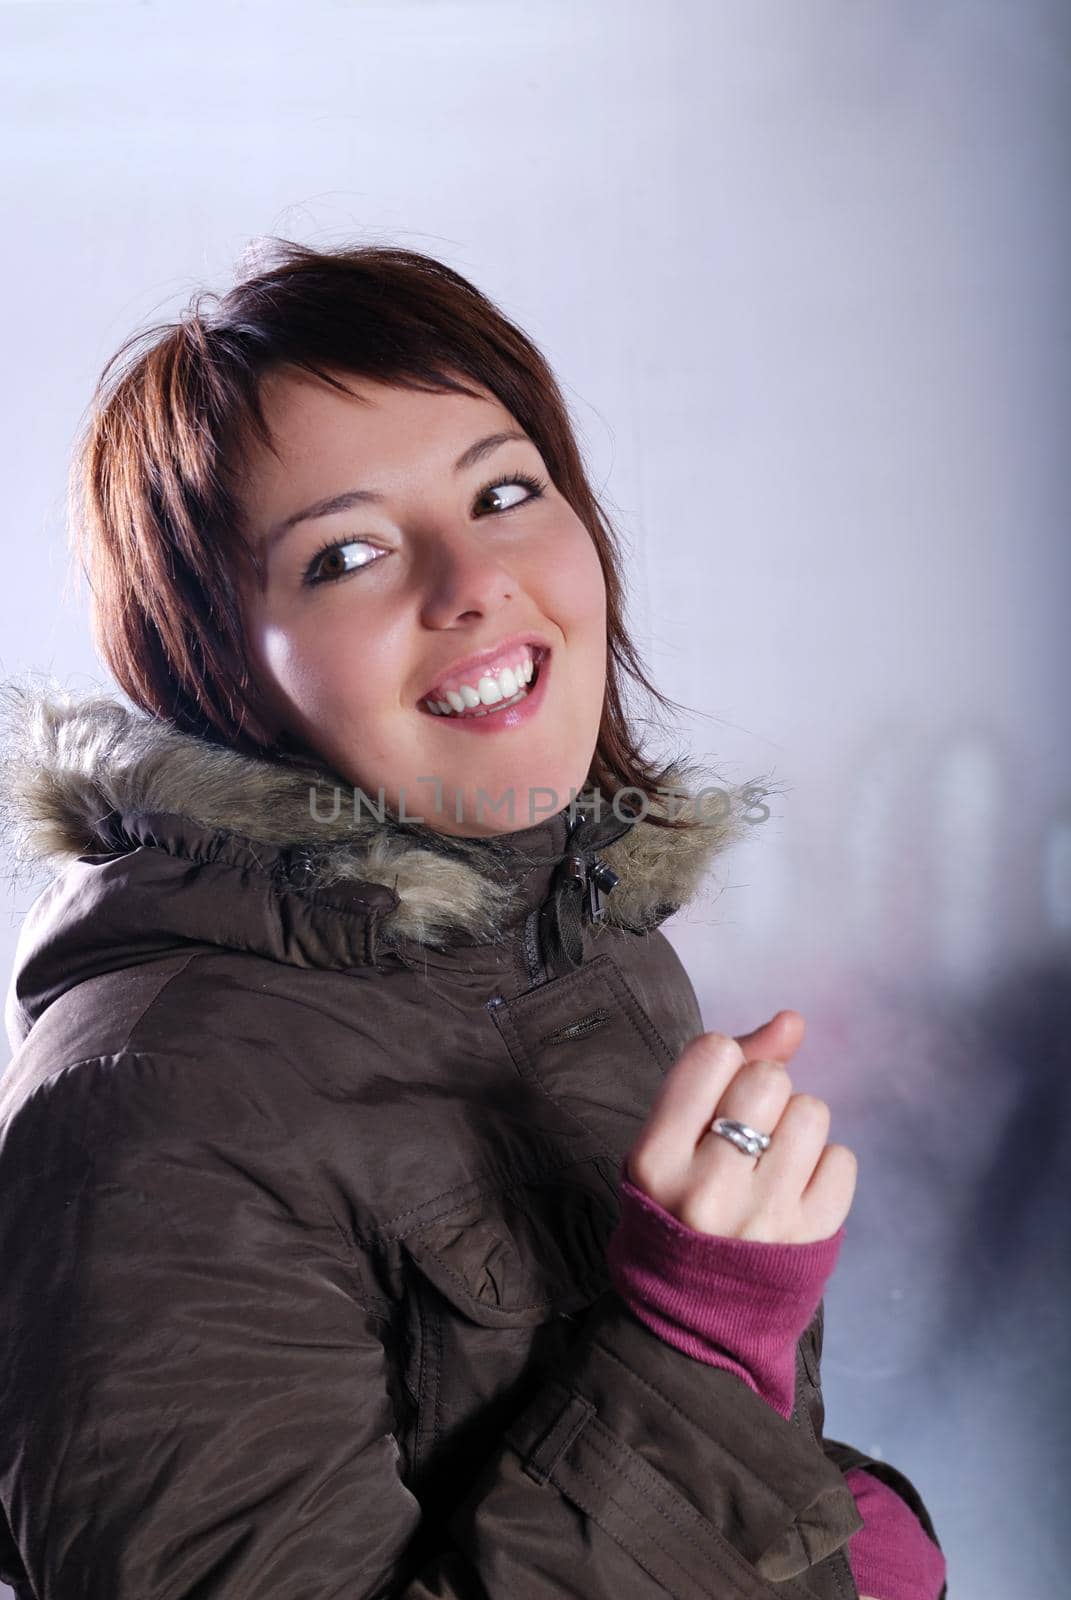 Cute young woman smiling in winter jacket by dotshock